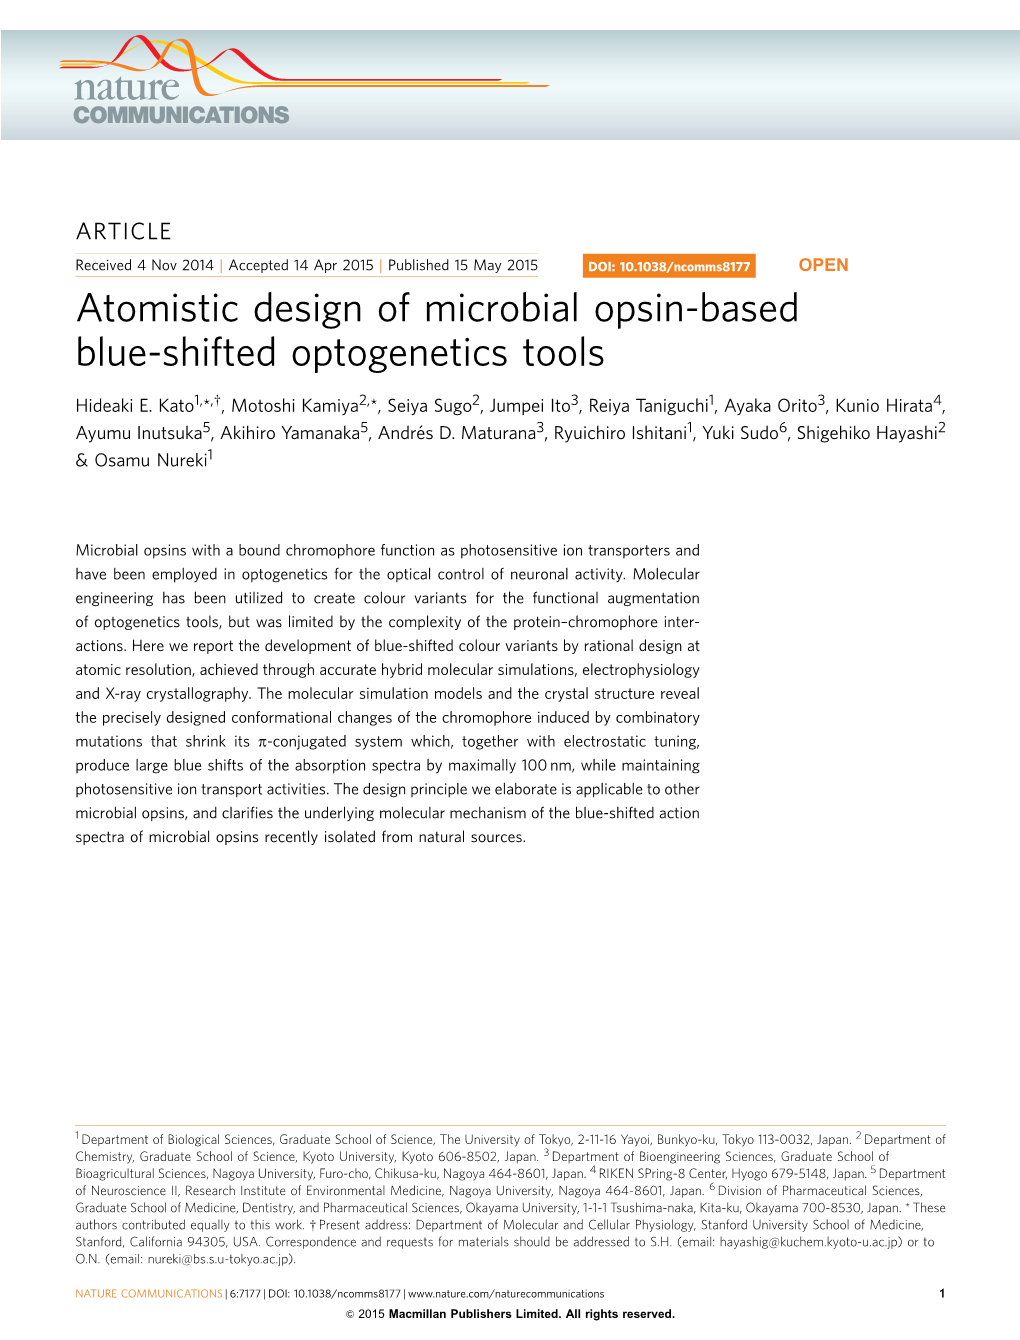 Atomistic Design of Microbial Opsin-Based Blue-Shifted Optogenetics Tools